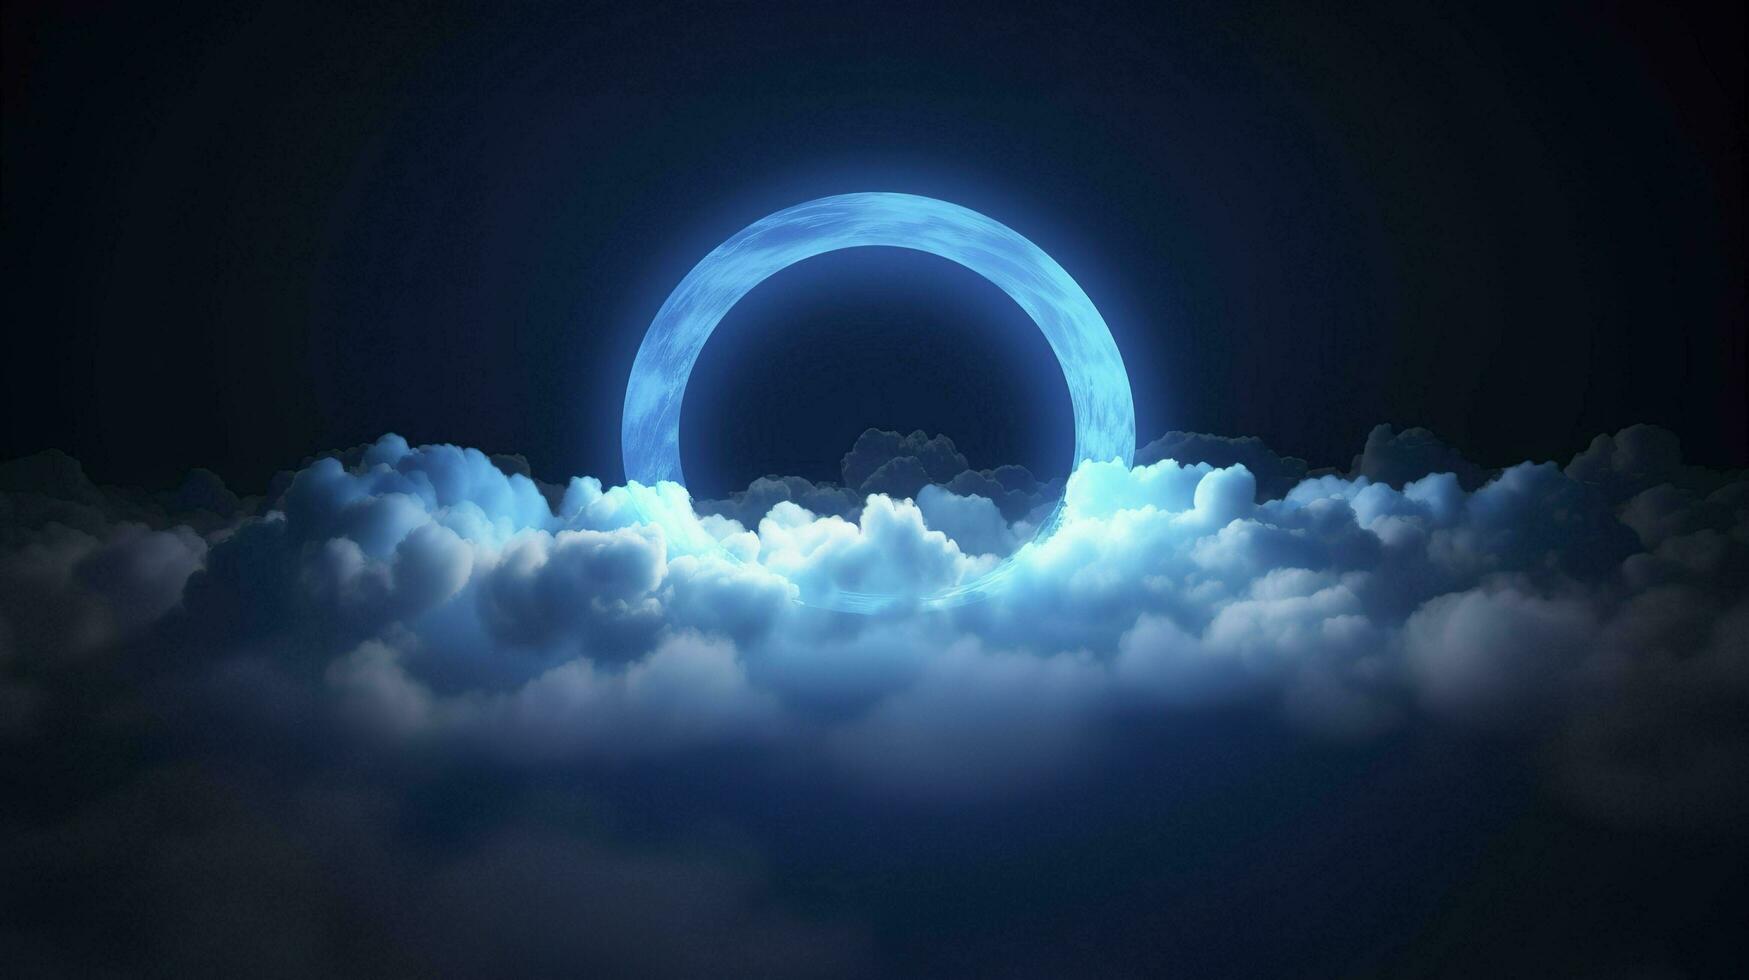 cloud clouds frame blue light, in the style of circular abstraction, 8k resolution, cosmic symbolism, dark symbolism, ethereal landscape, generat ai photo